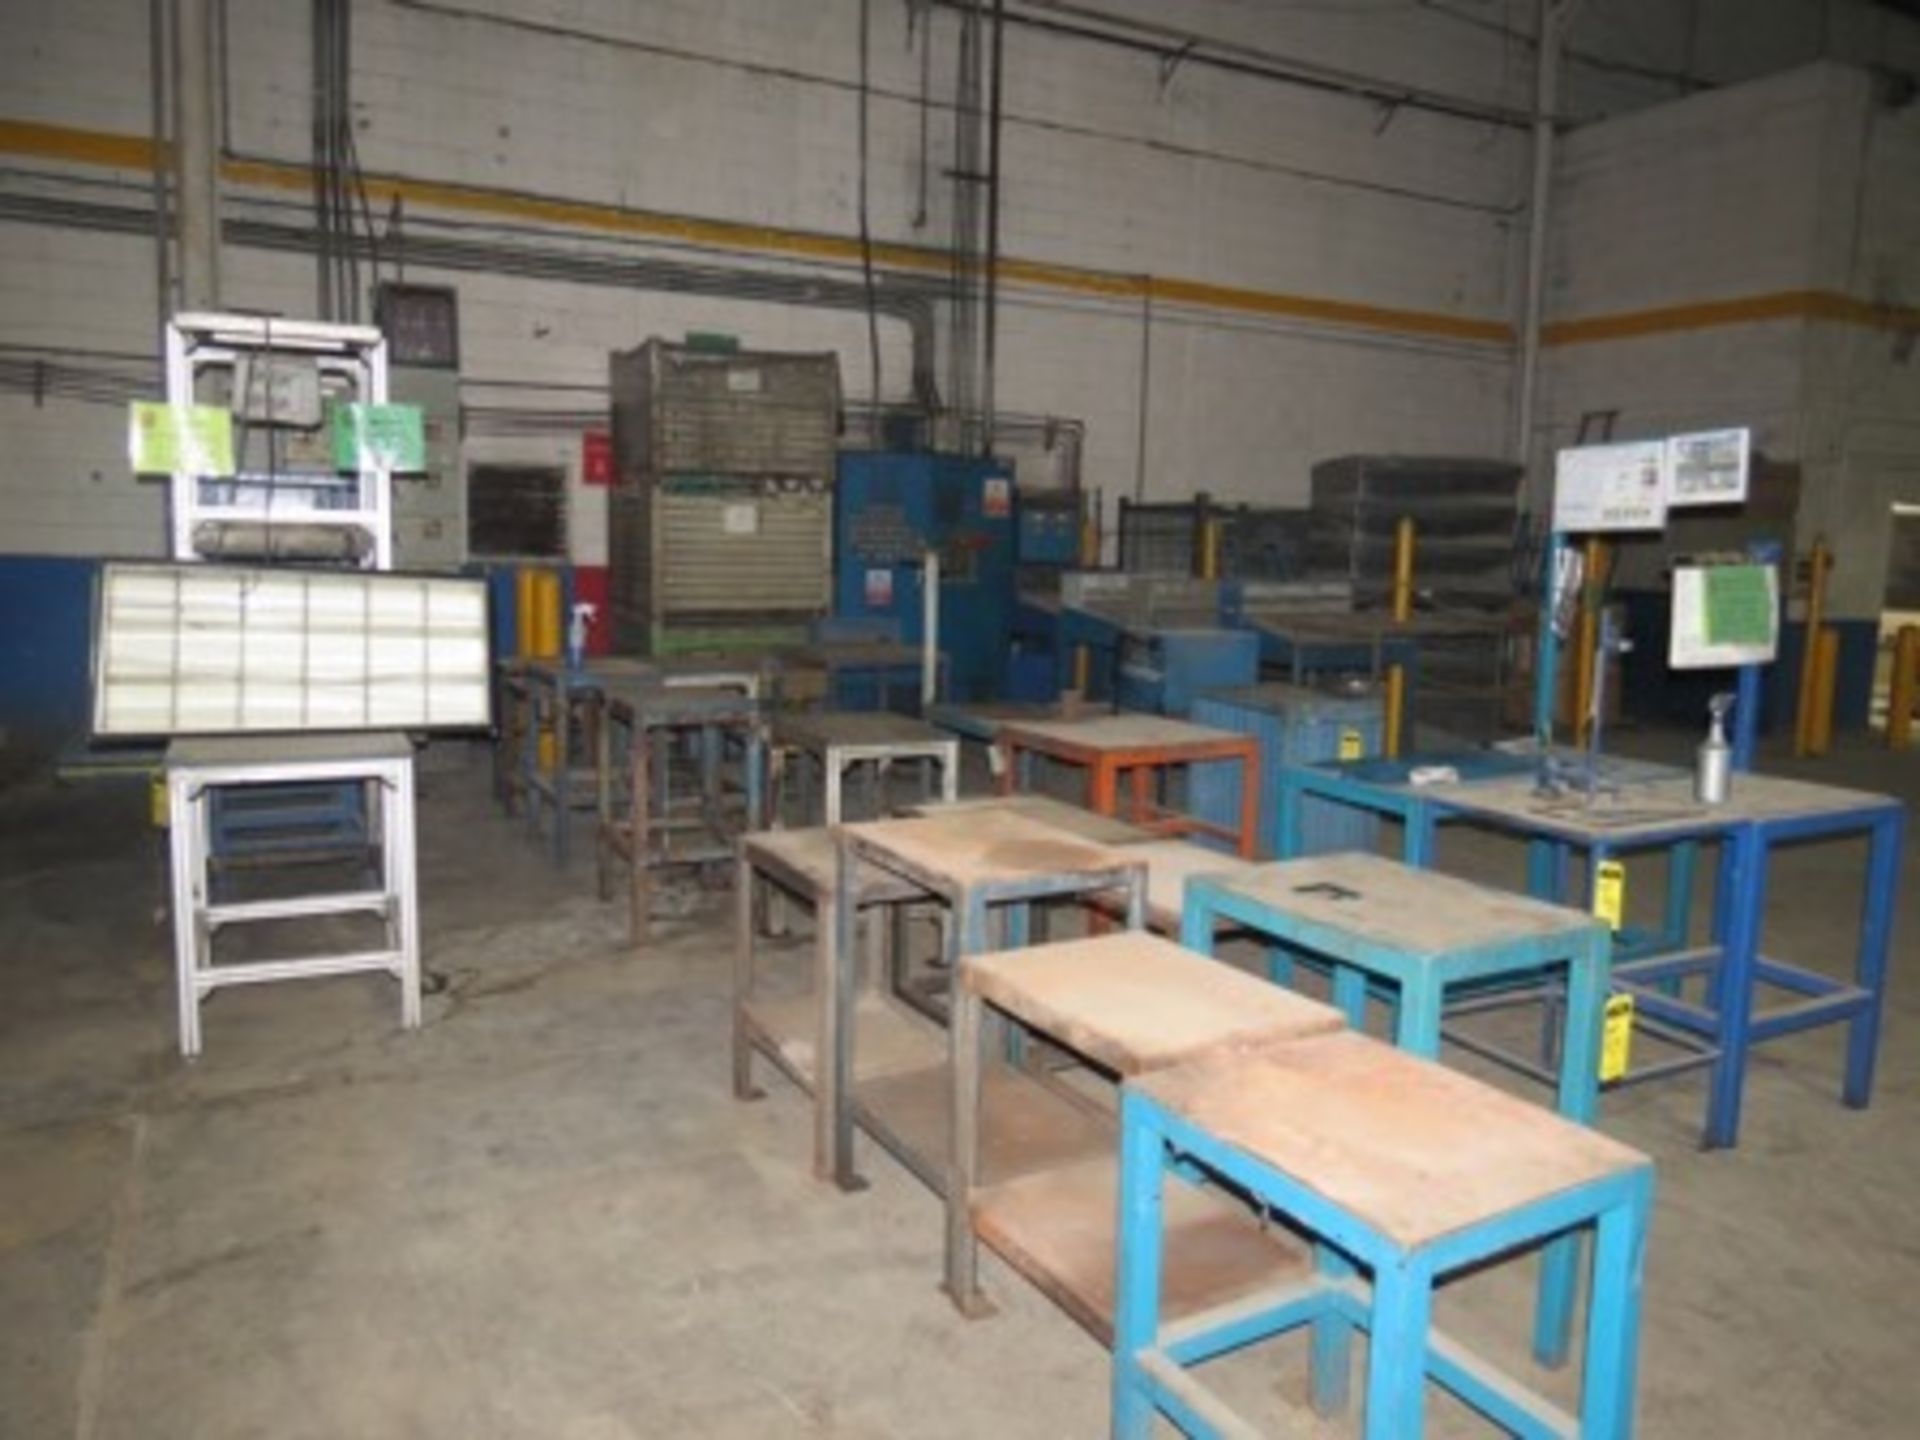 Approx. 50 workbenches